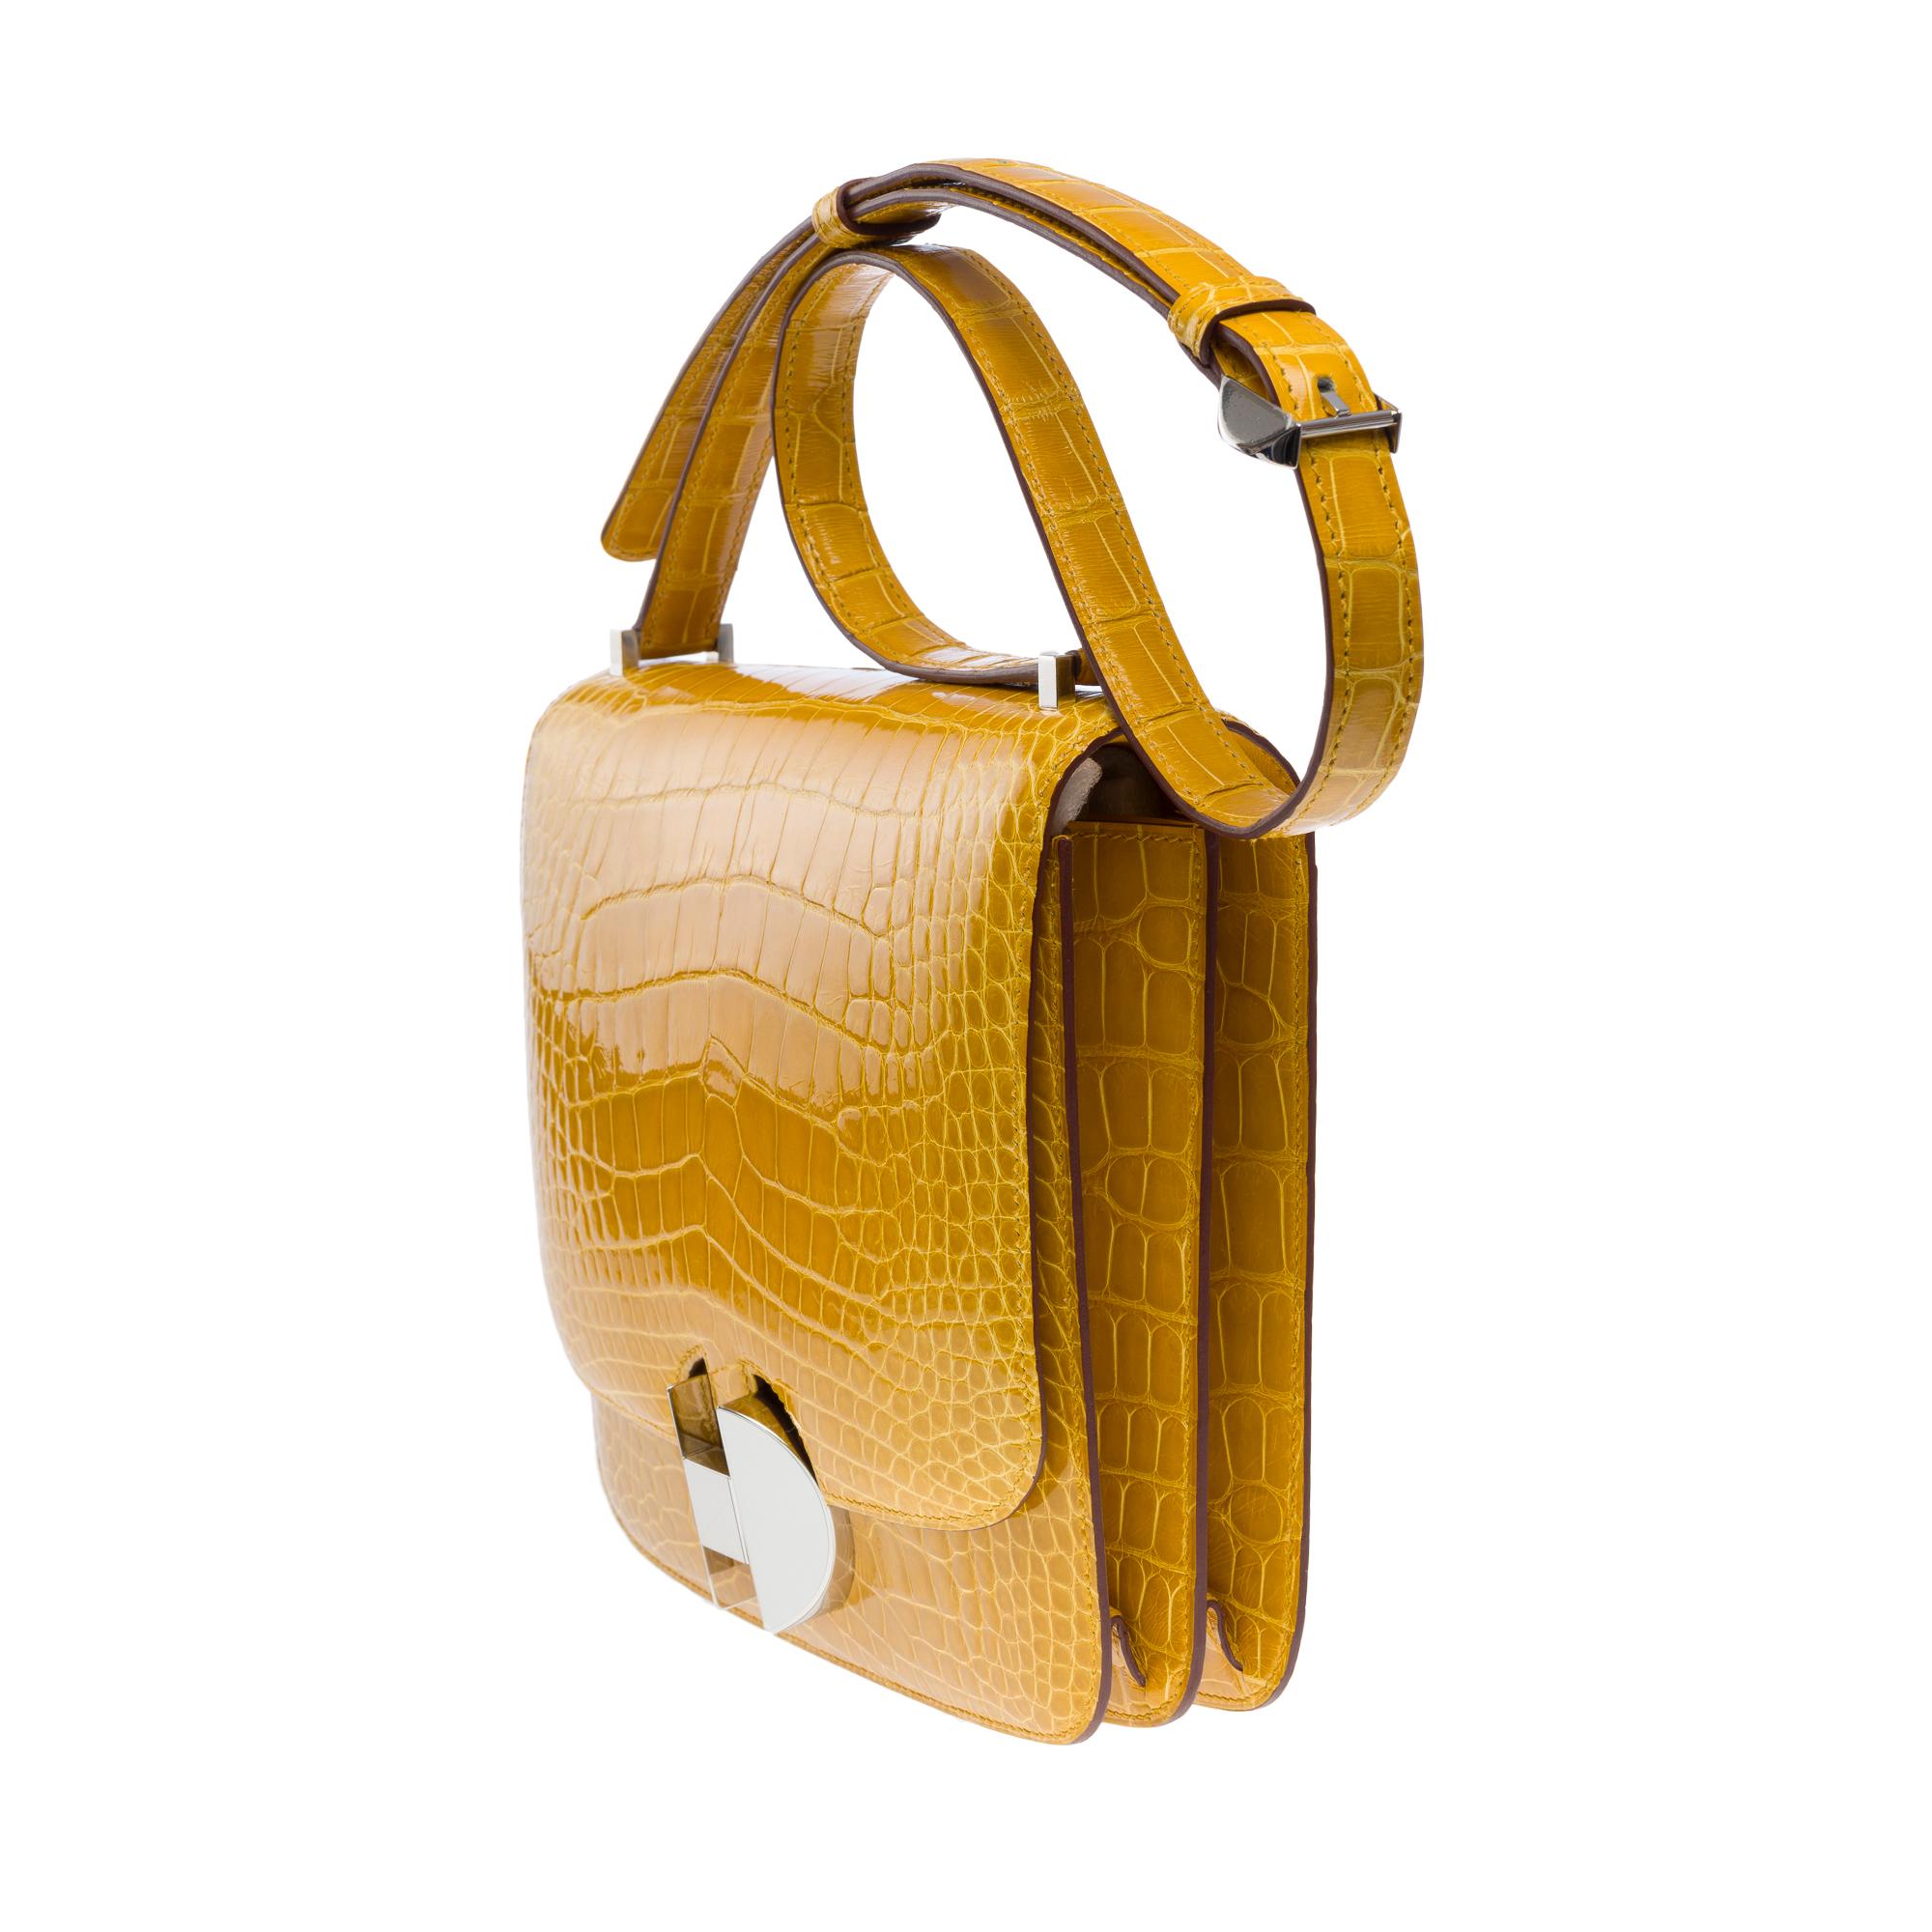 New Rare Hermes 2002 shoulder bag in Ambre Yellow Alligator leather, SHW For Sale 1